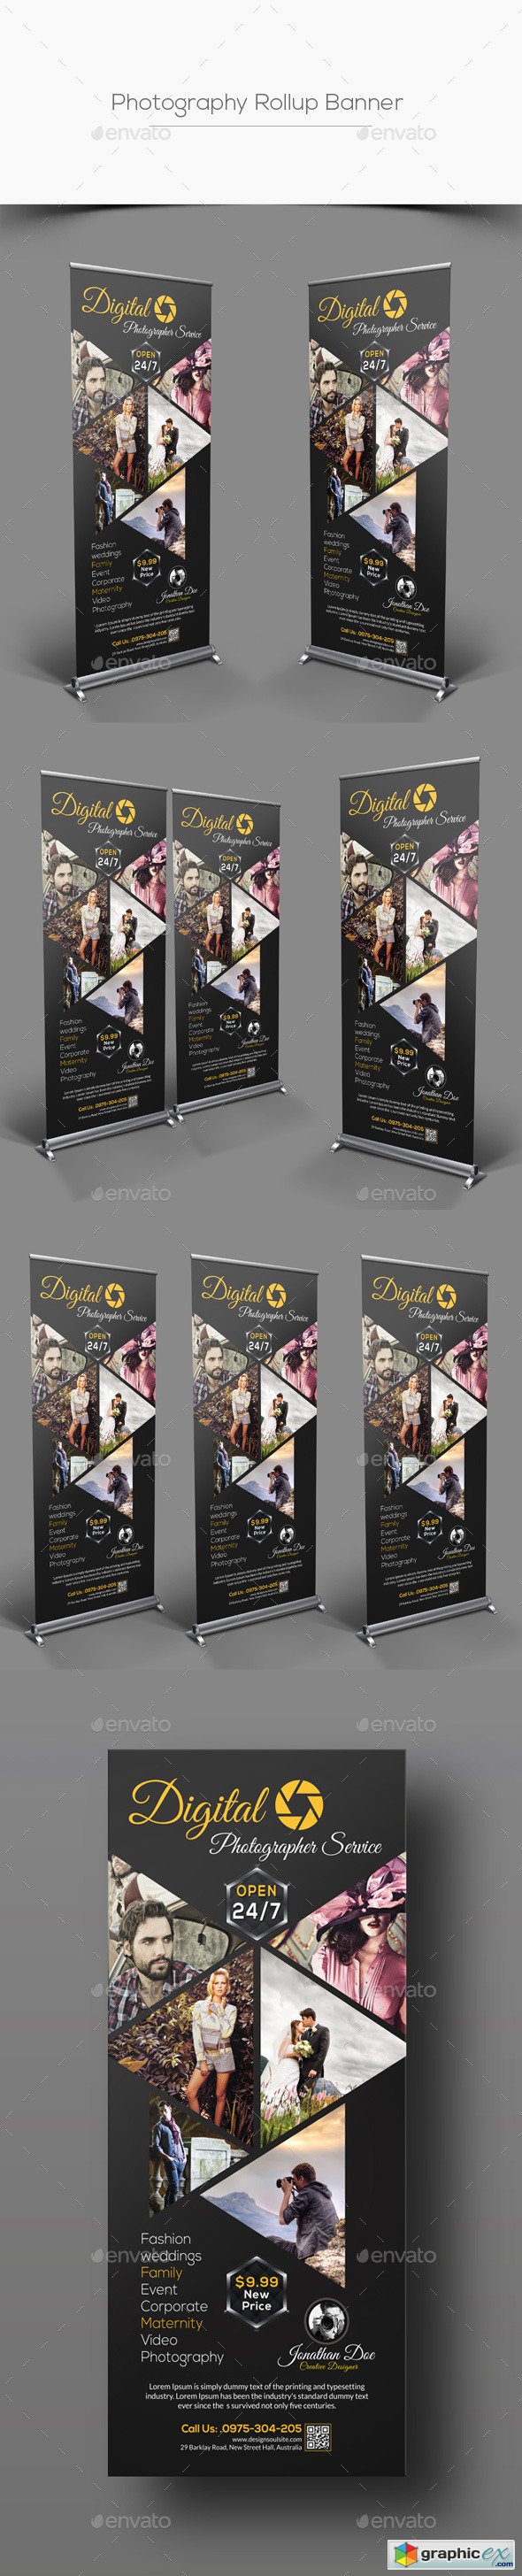 Photography Rollup Banner